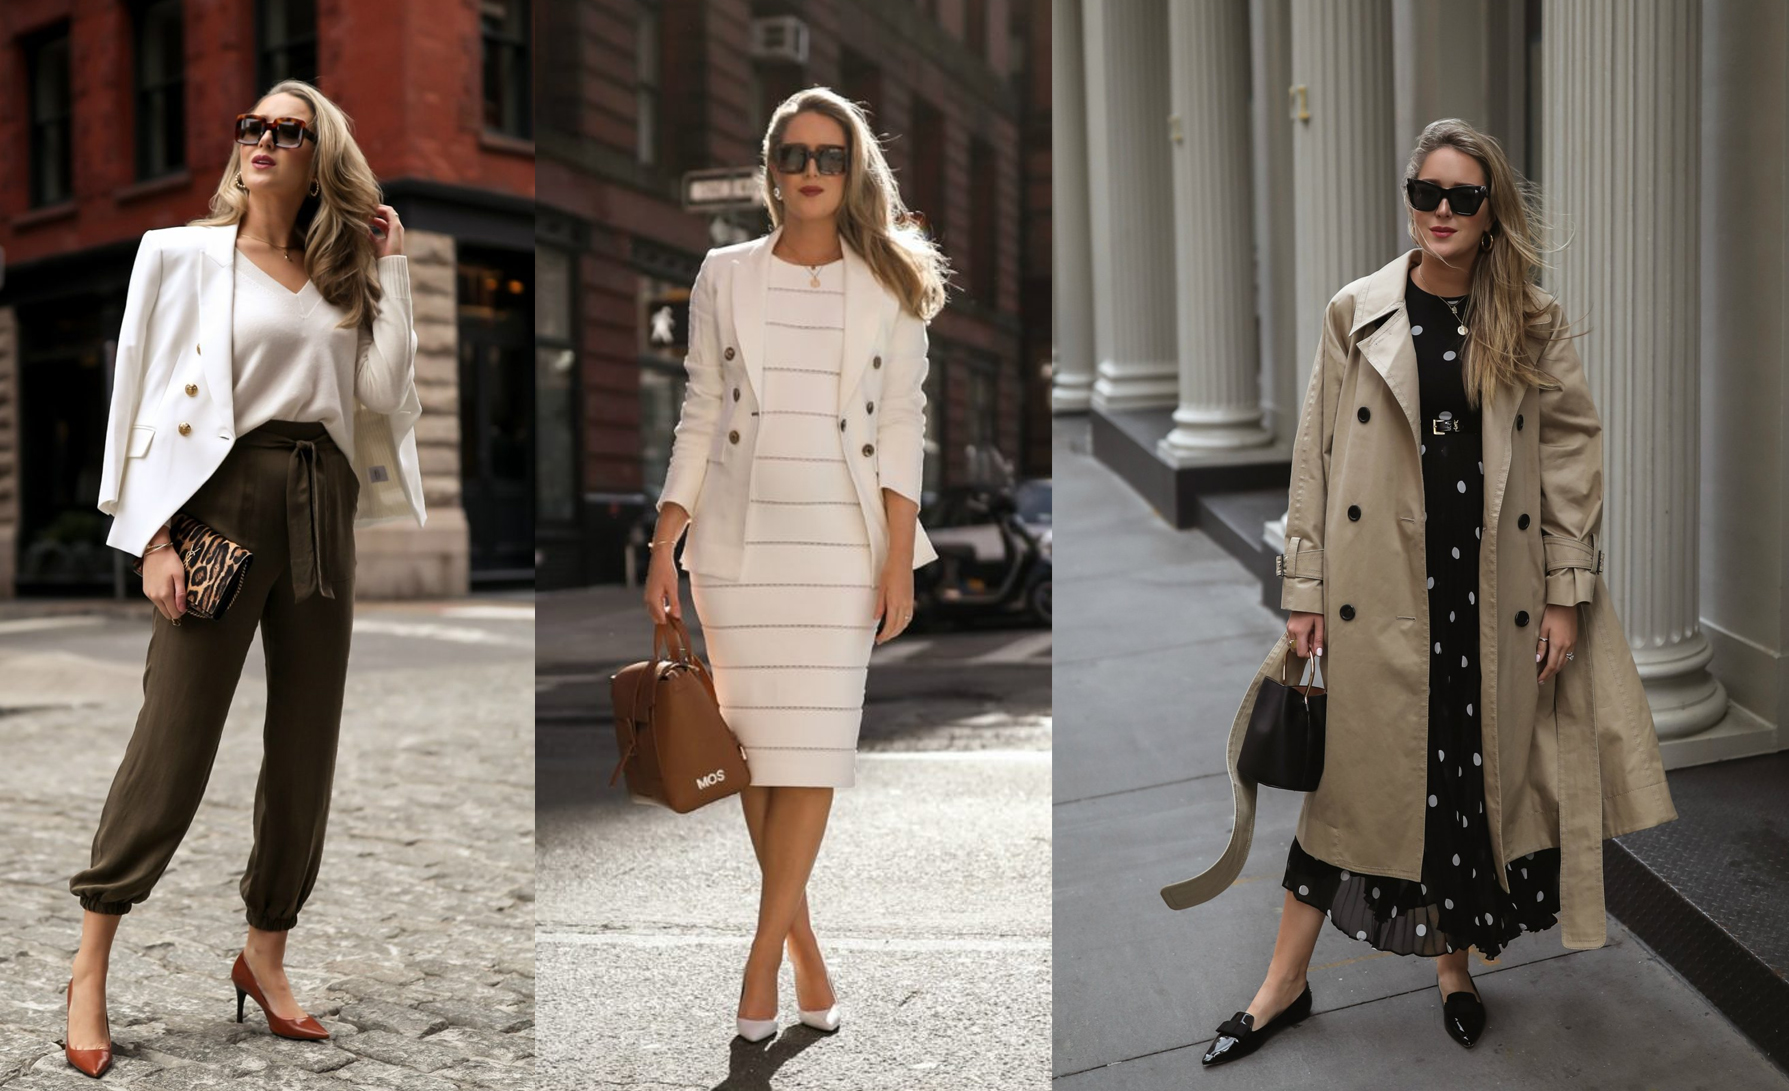 30 Super Classy & Trendy Outfit Inspirations To Wear This Year